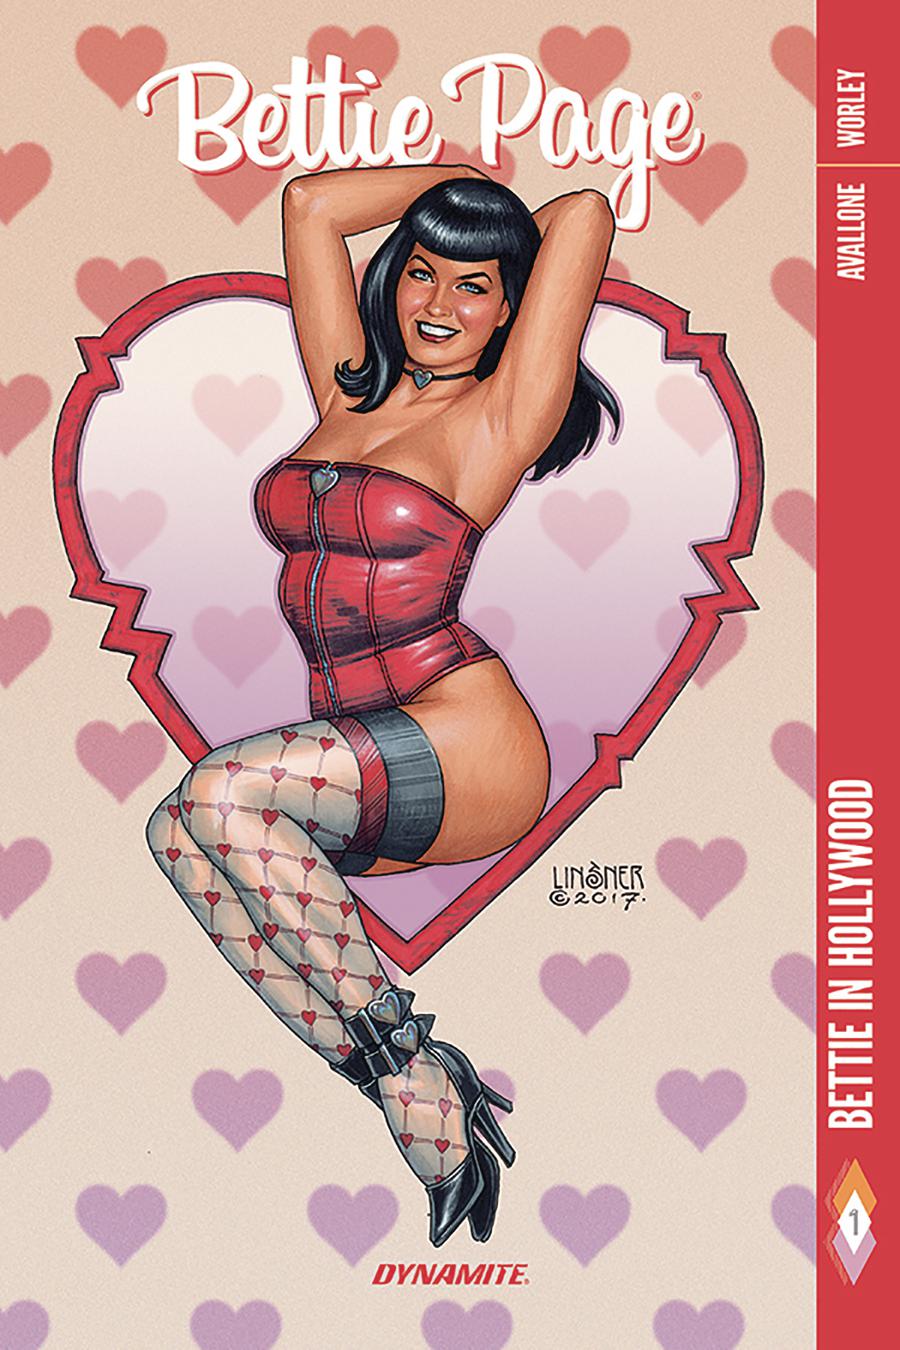 Bettie Page Vol 1 Bettie In Hollywood TP